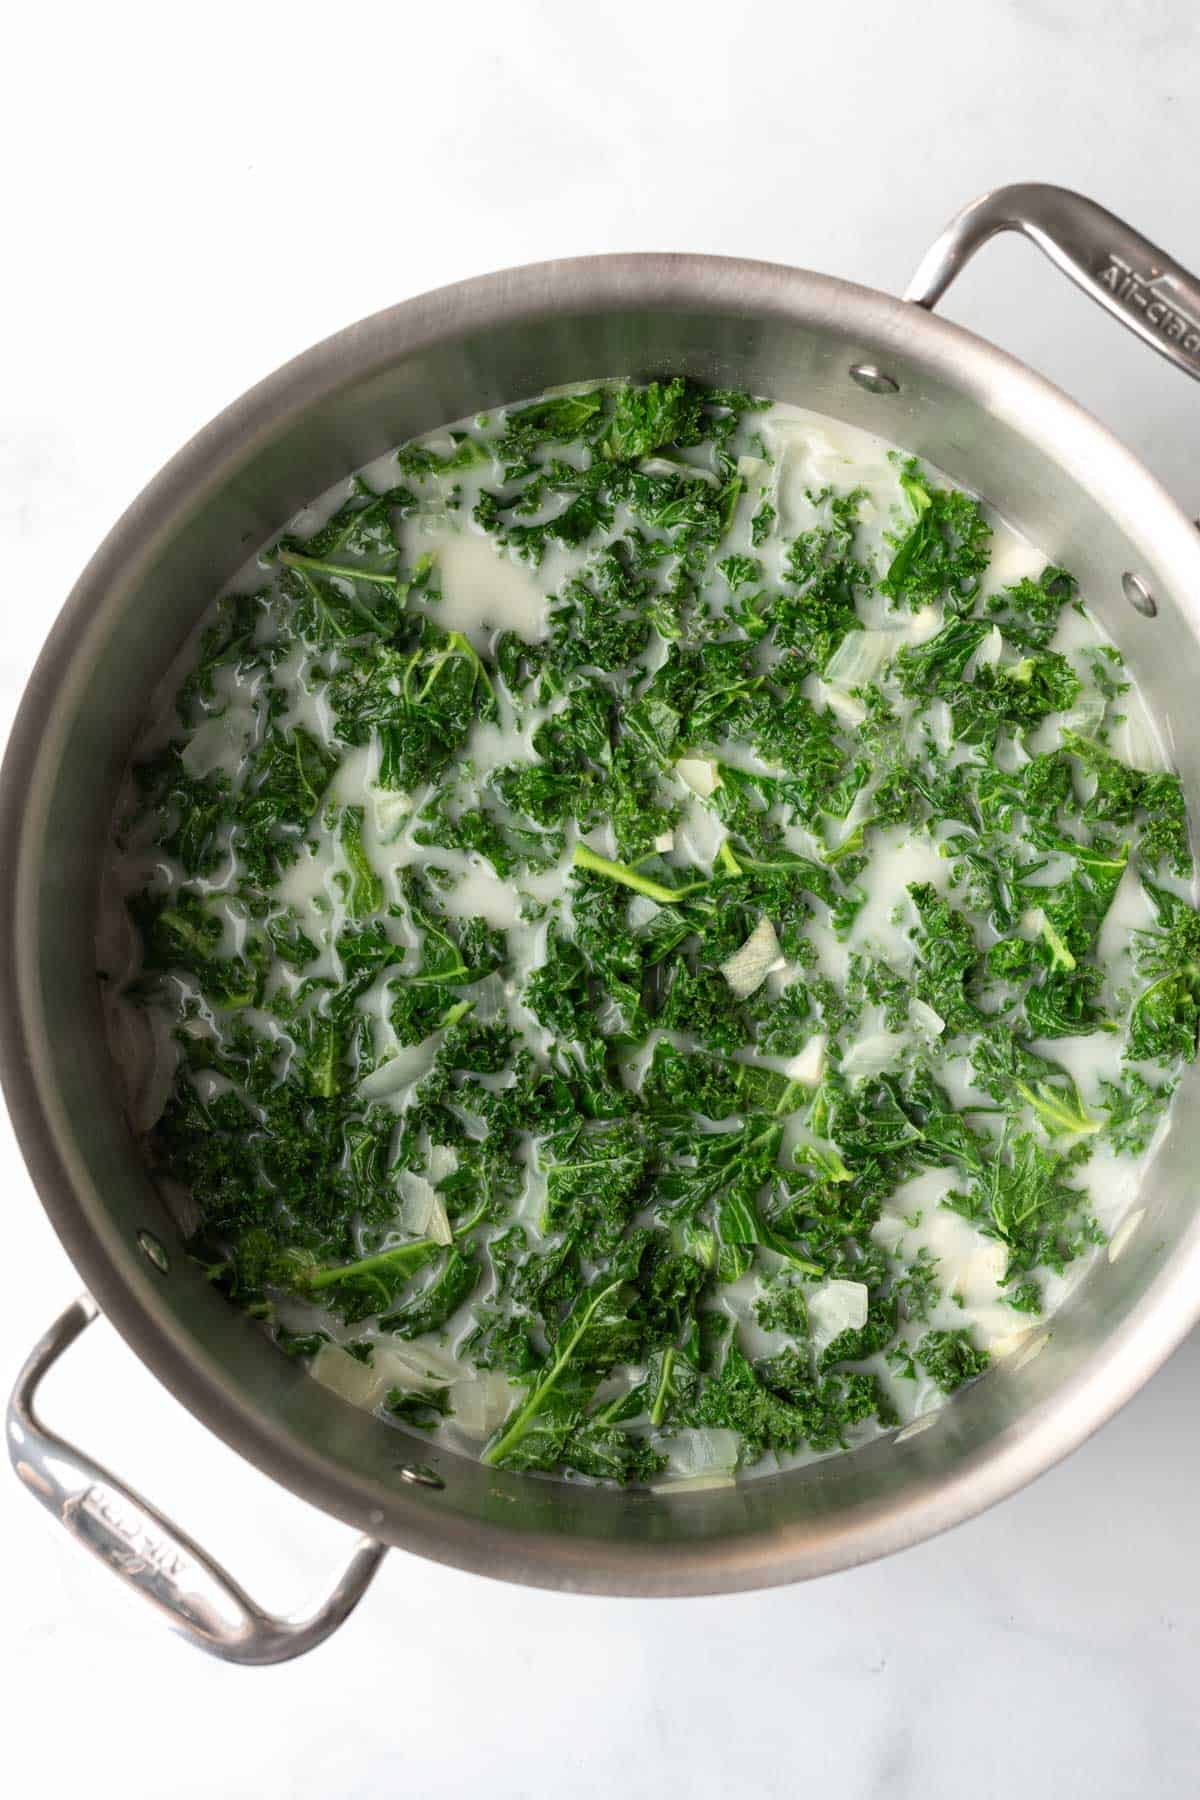 Green kale and light coconut milk are added and the soup is brought to a simmer.